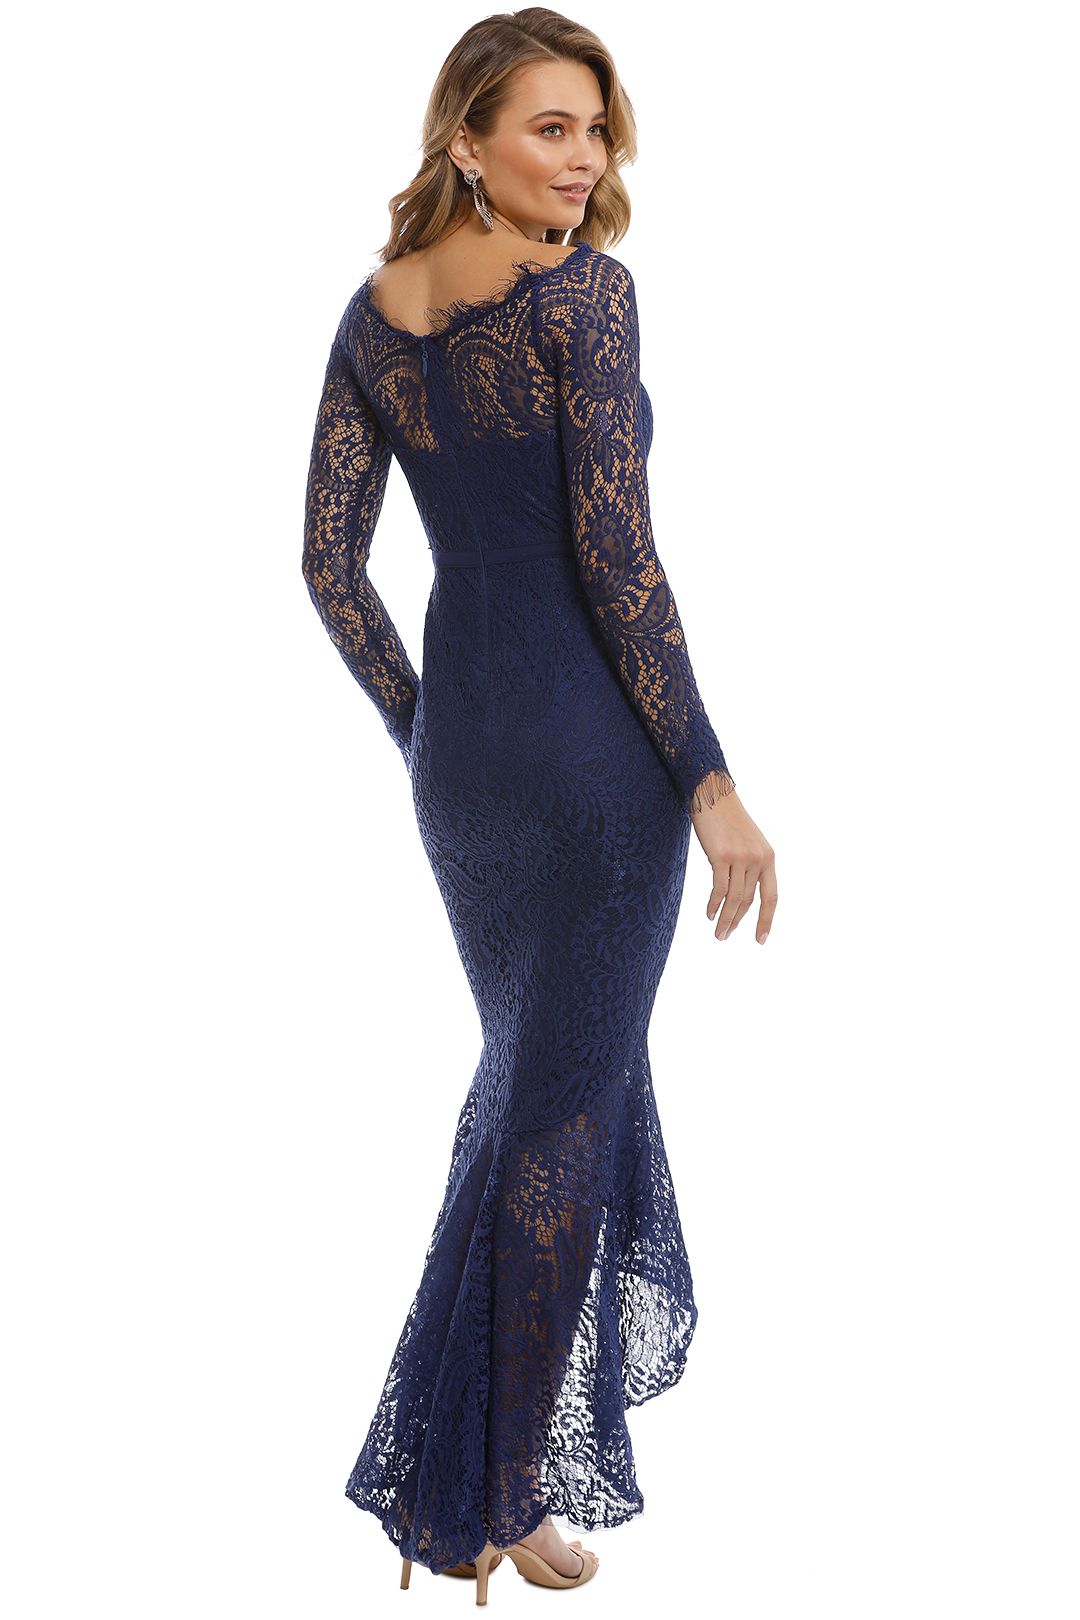 L'Amour - Ana Gown - Royal Blue - Back